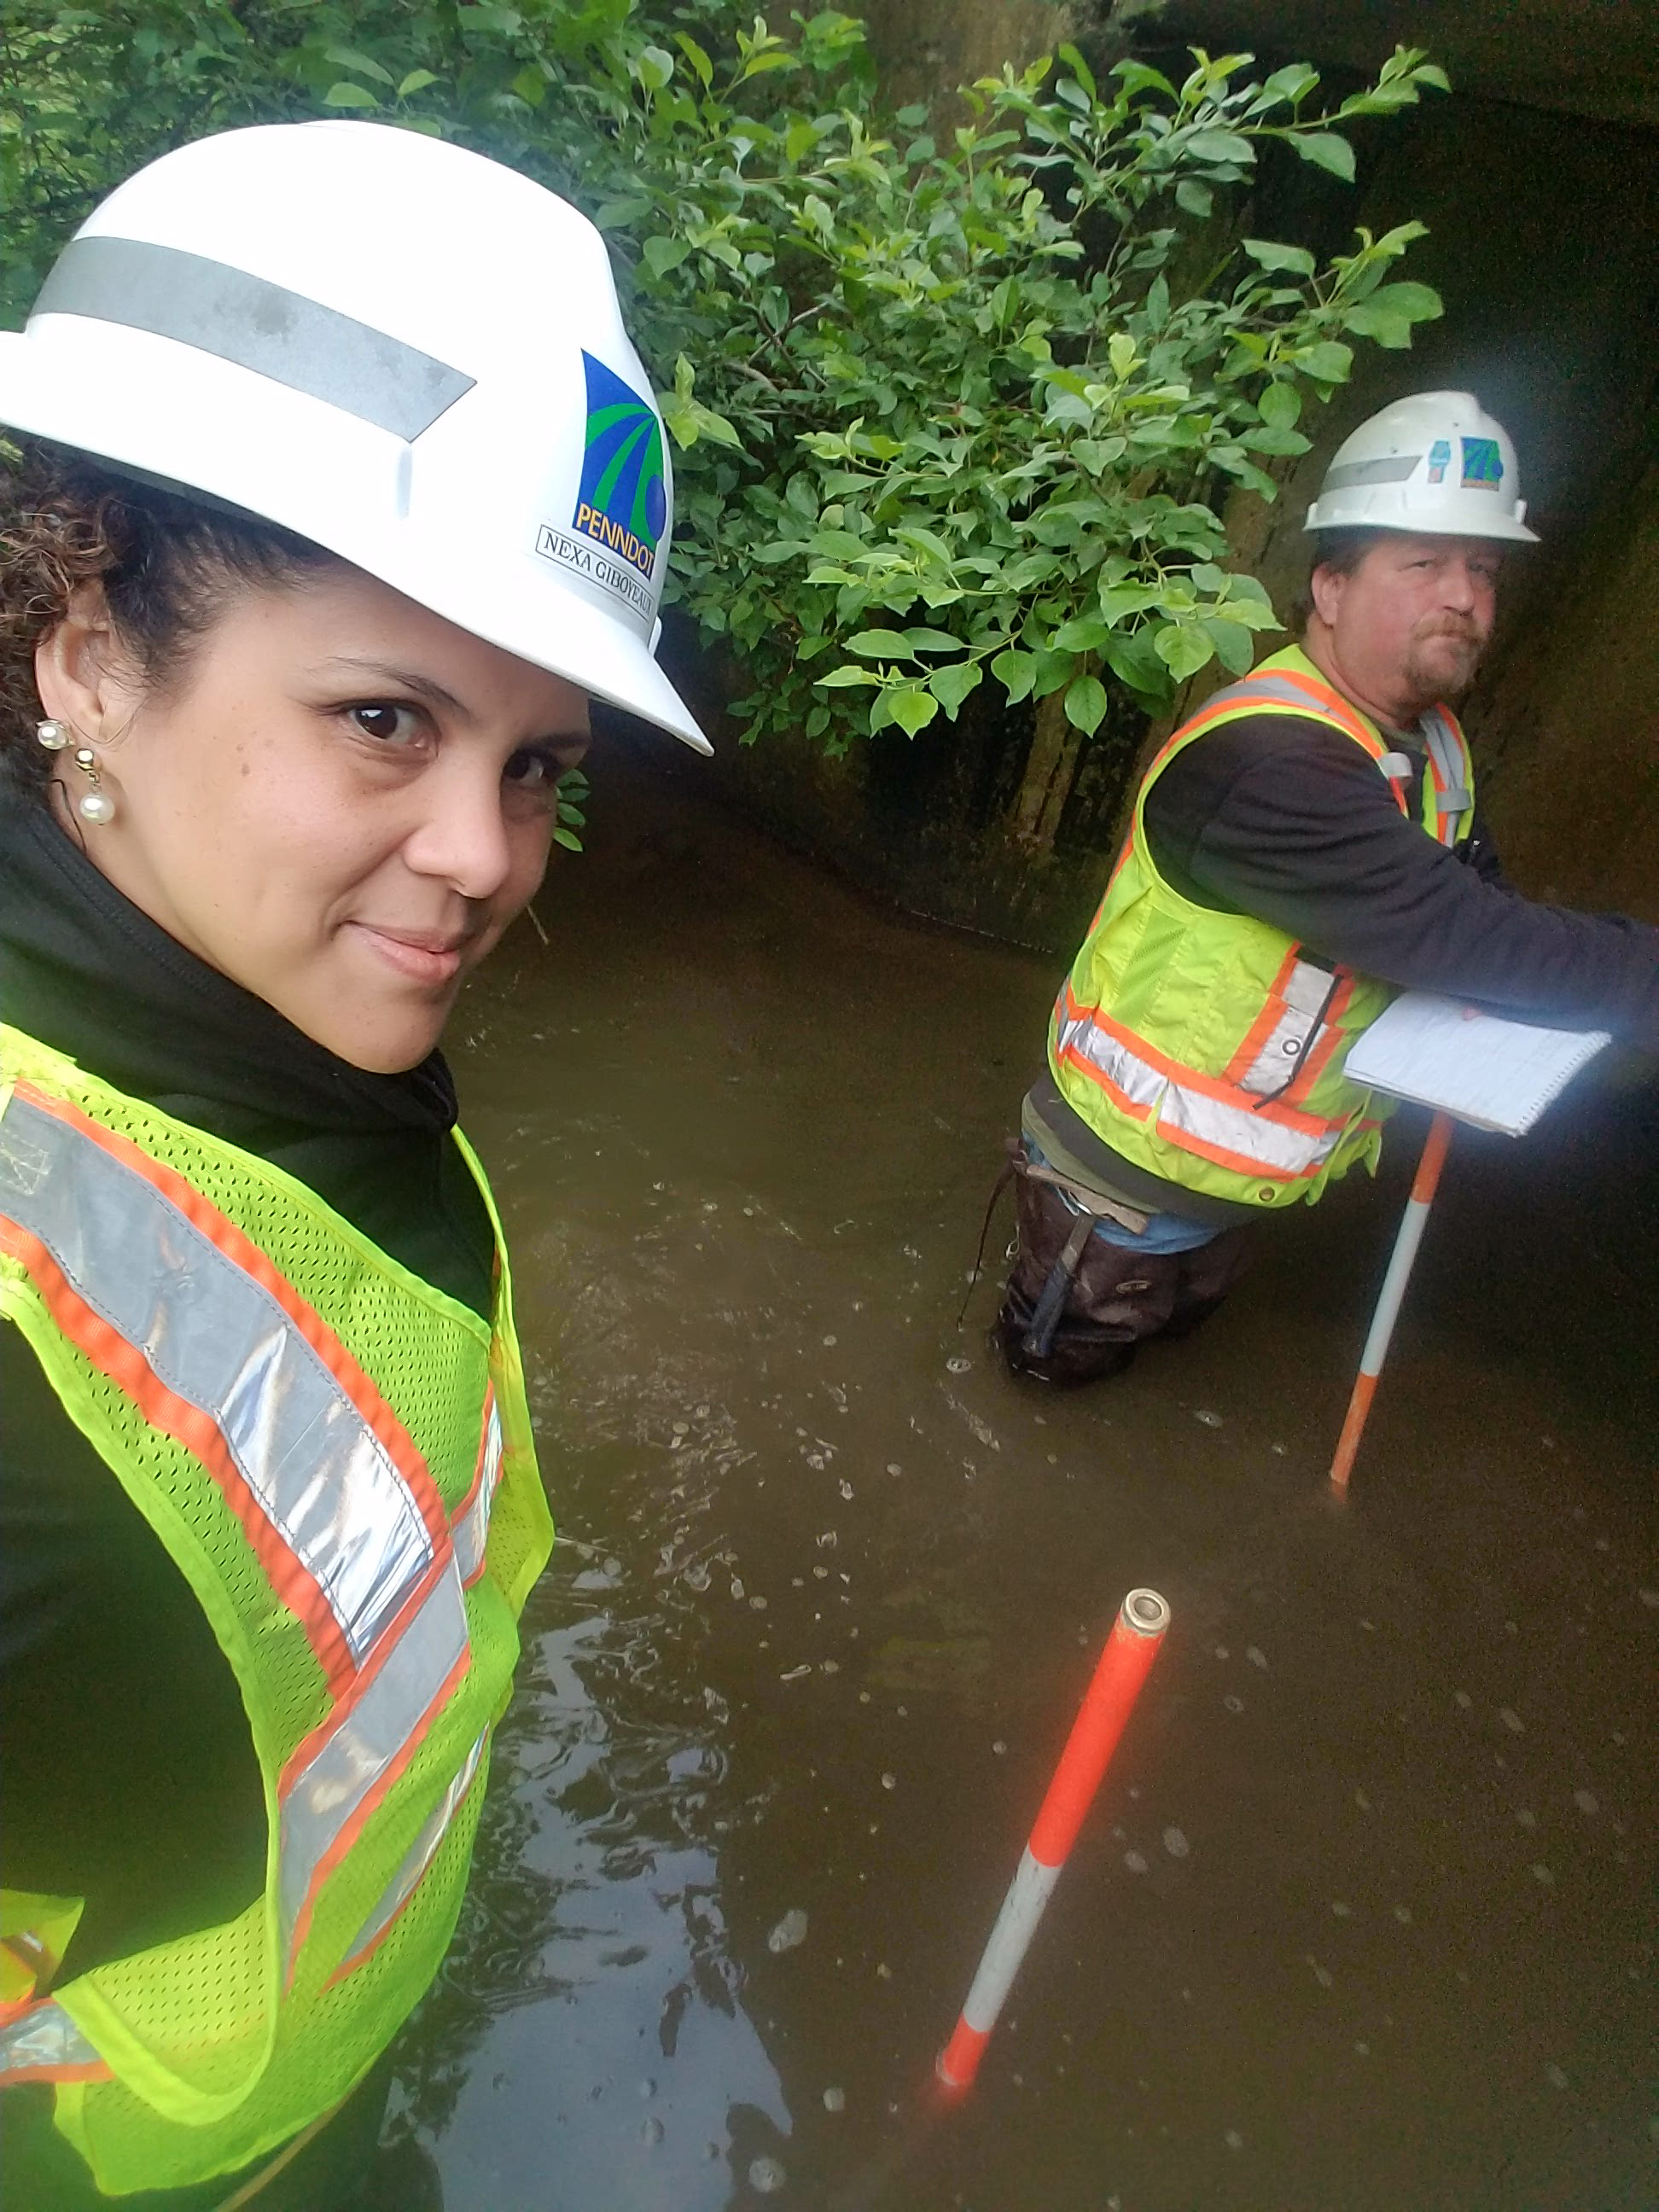 Nexa Castro with a hard hat and construction vest on taking a selfie on a worksite.